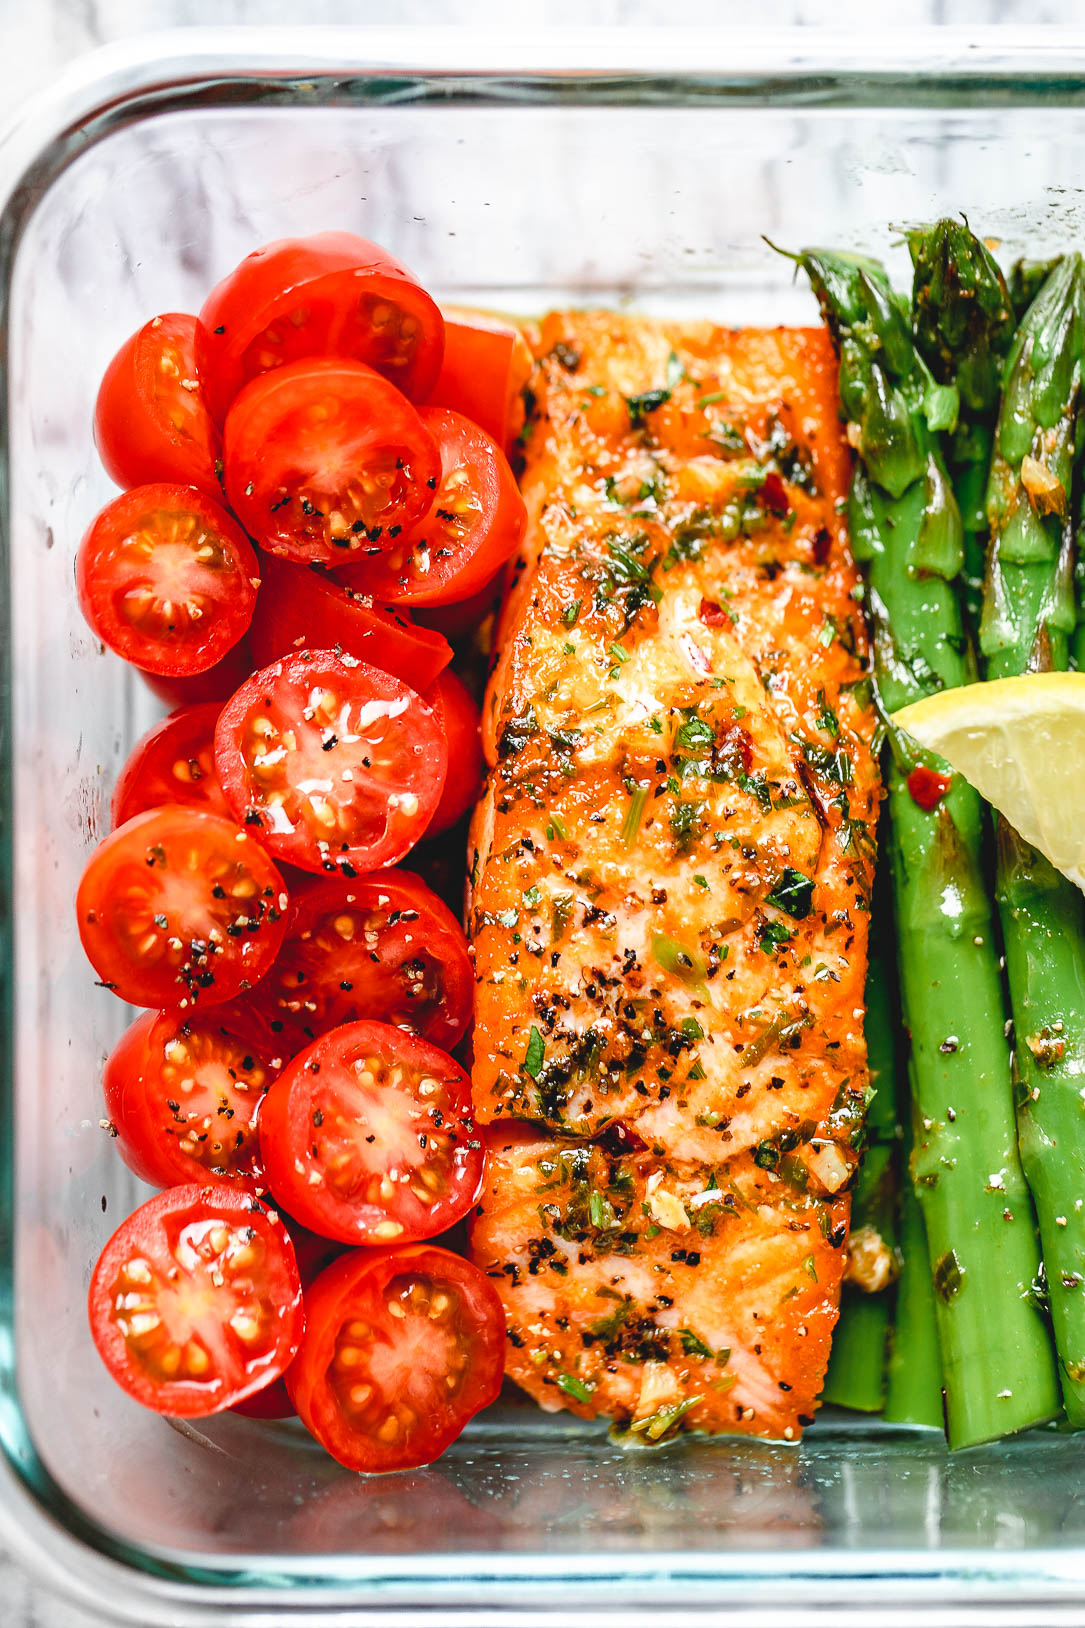 Meal-Prep Garlic Butter Salmon with Asparagus Recipe – Meal Prep Salmon ...